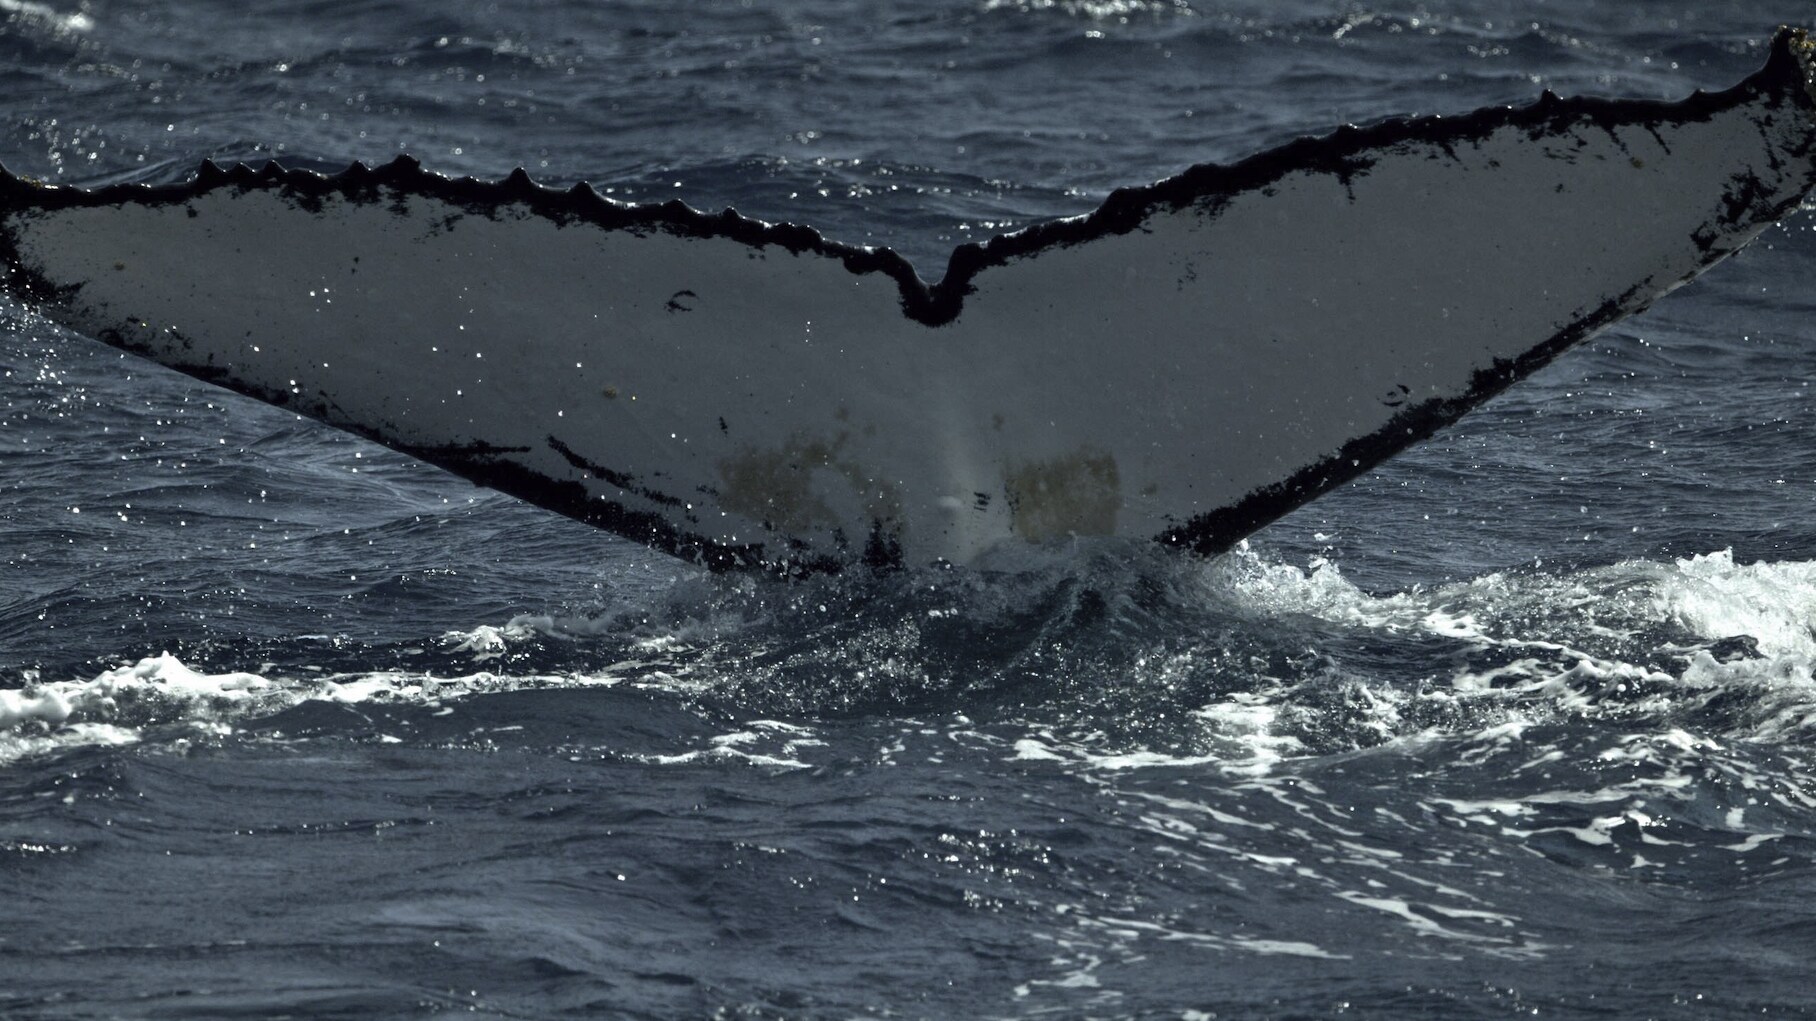 The humpback's tail - called a fluke - has patterns as unique as a human fingerprint. Scientists use them to identify individuals year after year. (National Geographic for Disney+/Hayes Baxley)